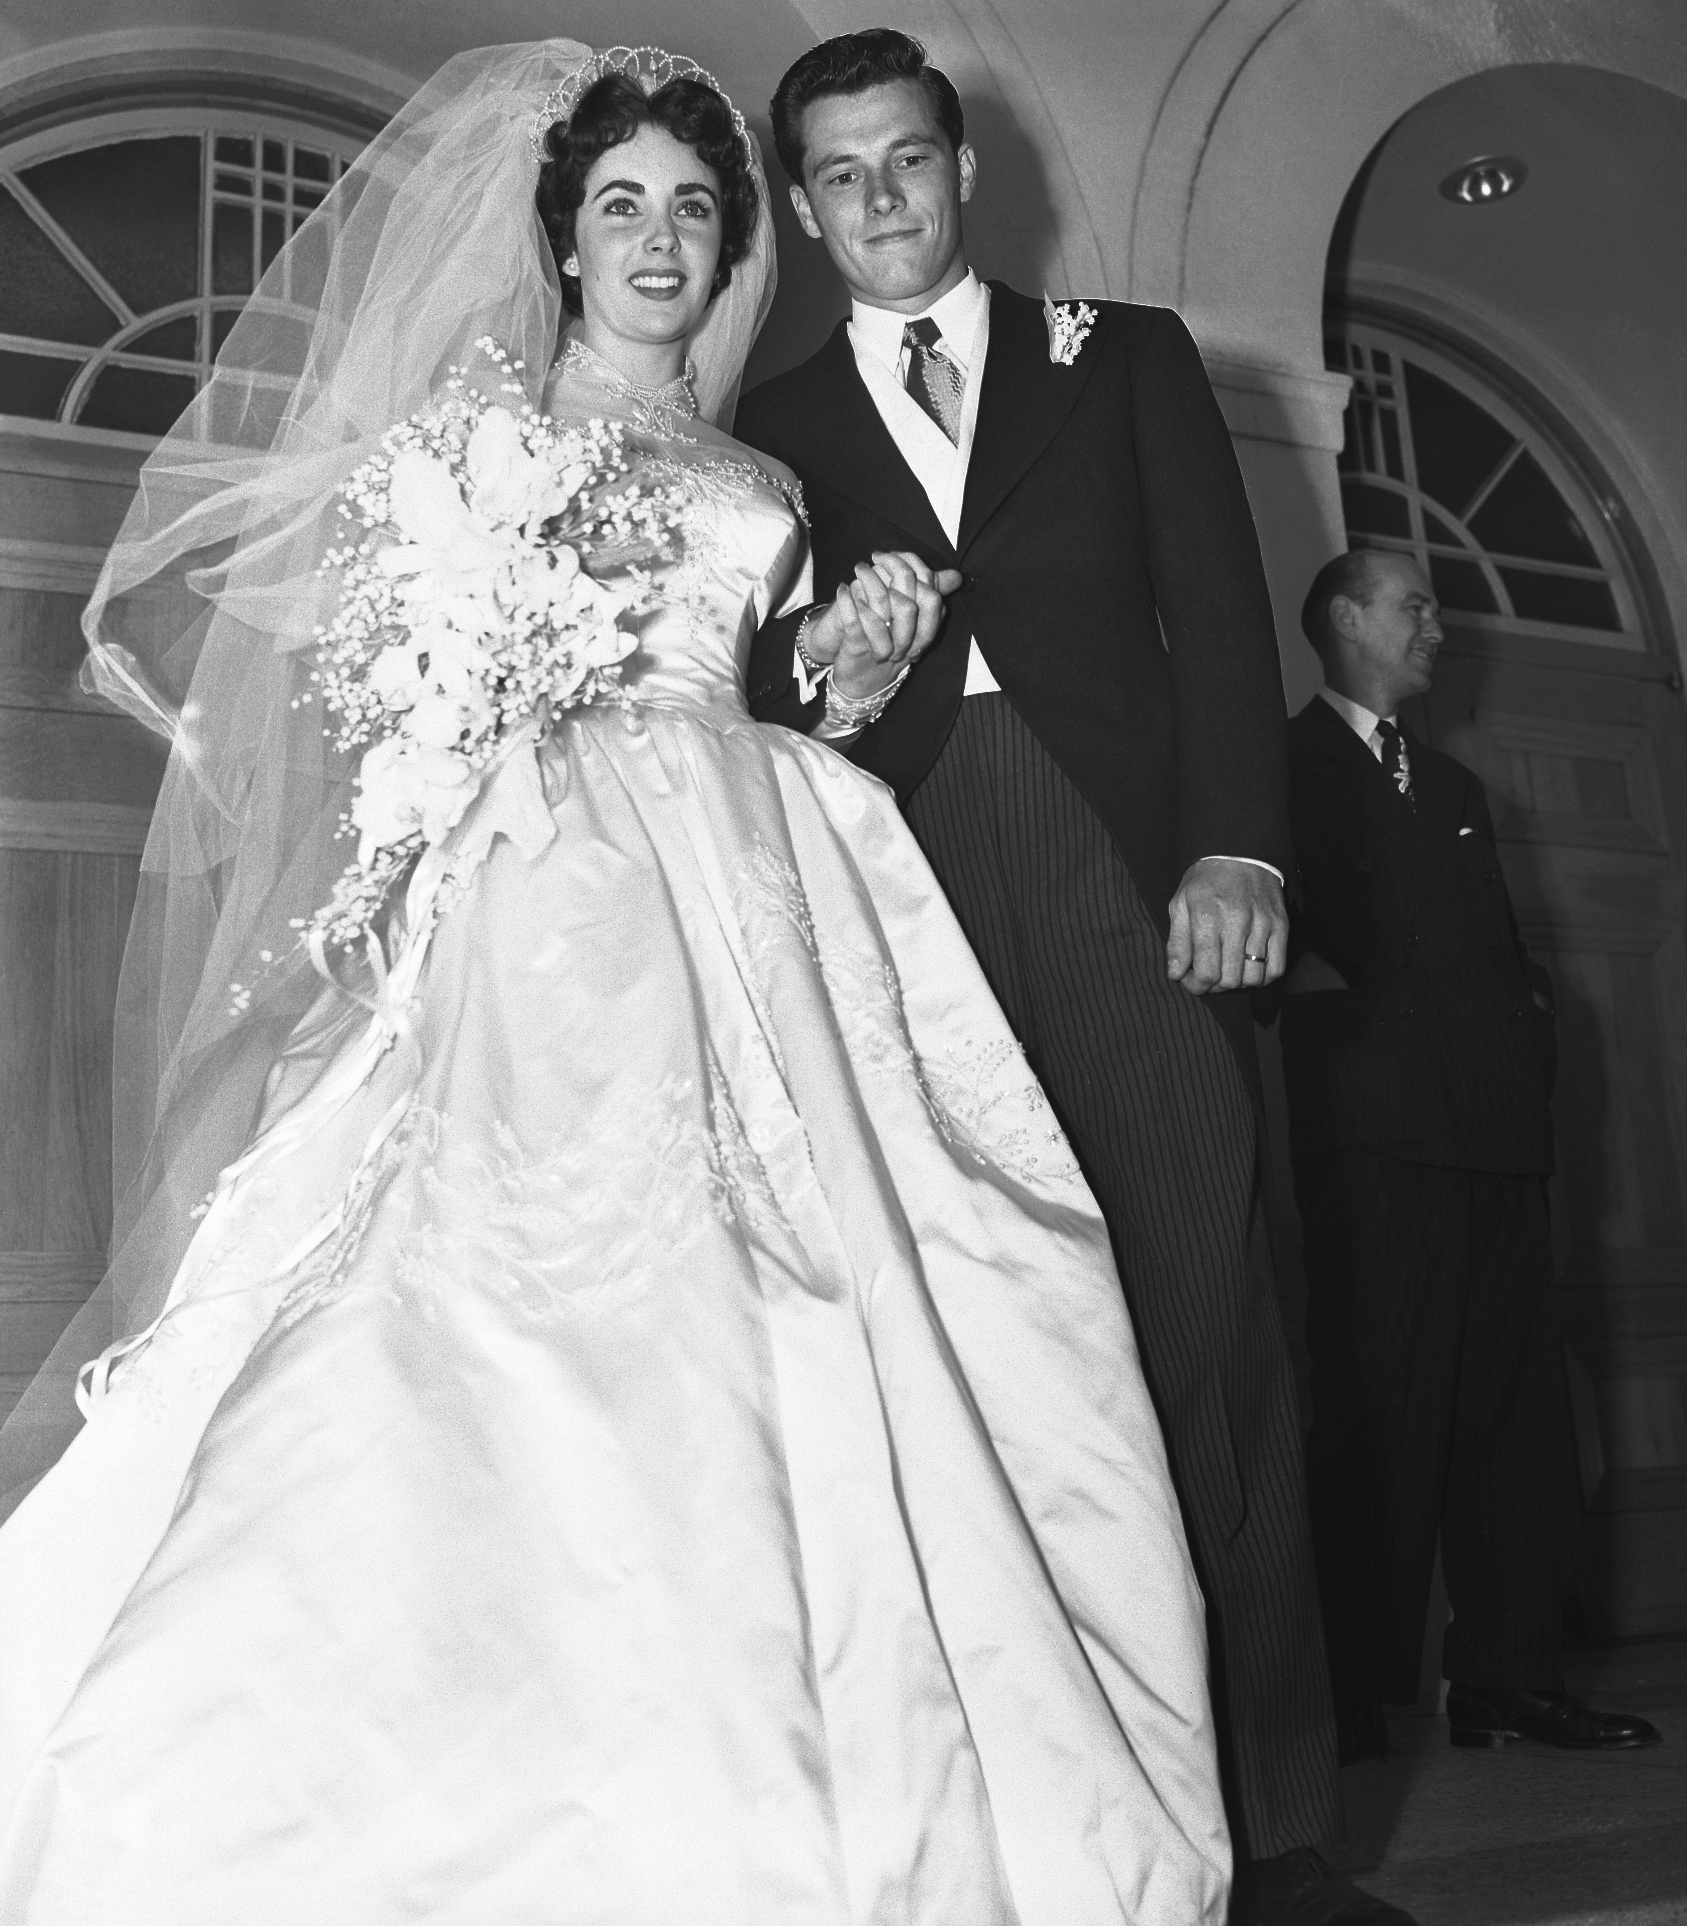 Newlywed couple, bride in a gown with a voluminous veil, groom in a tuxedo, smiling as they walk hand in hand